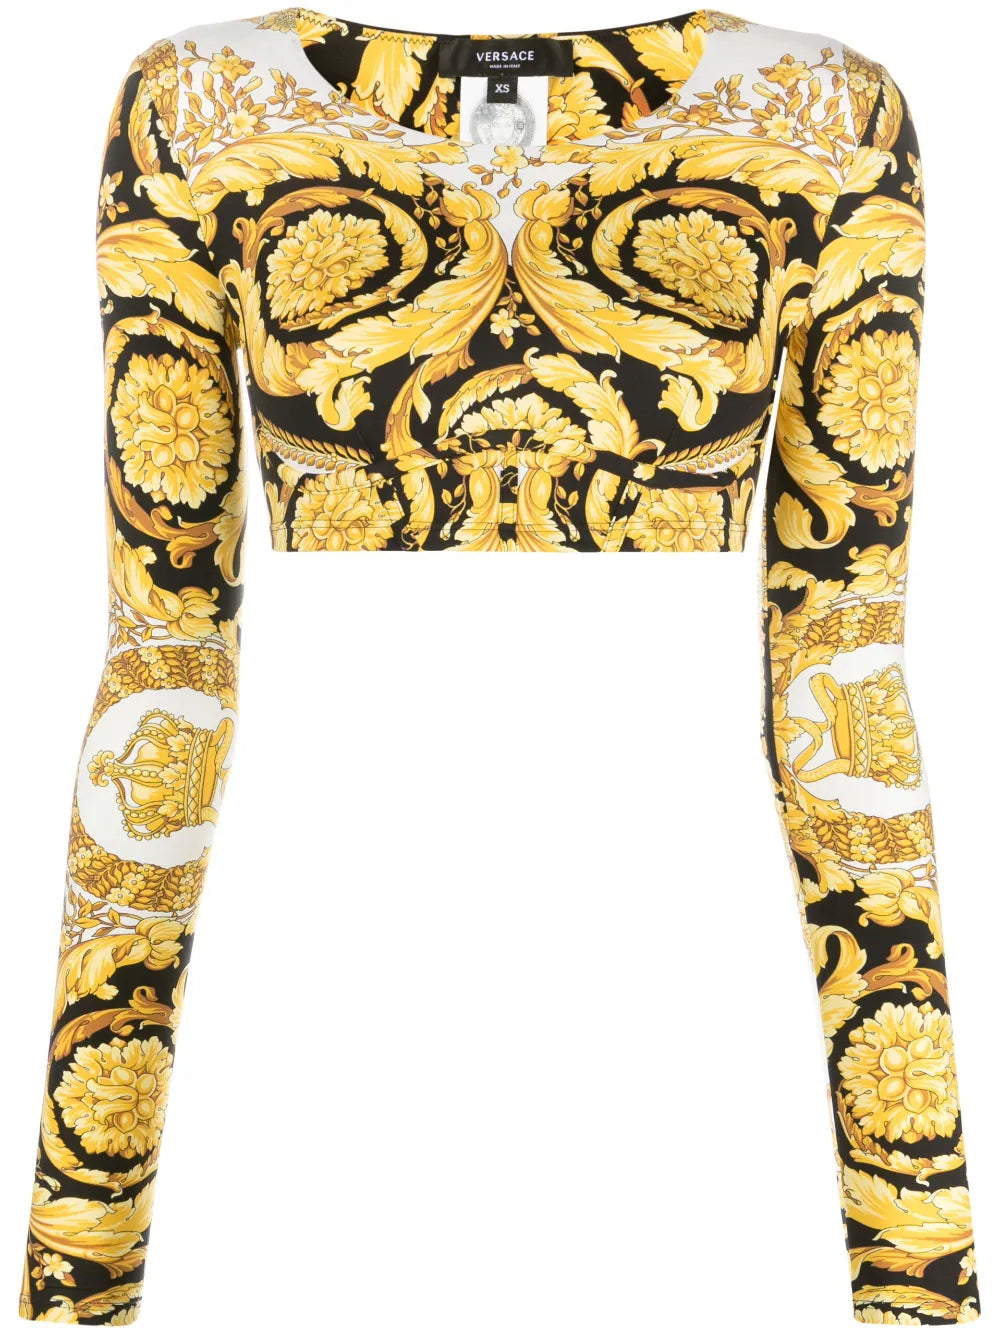 Versace Barocco Lace Bra Top In Paisley,yellow,white - White & Gold